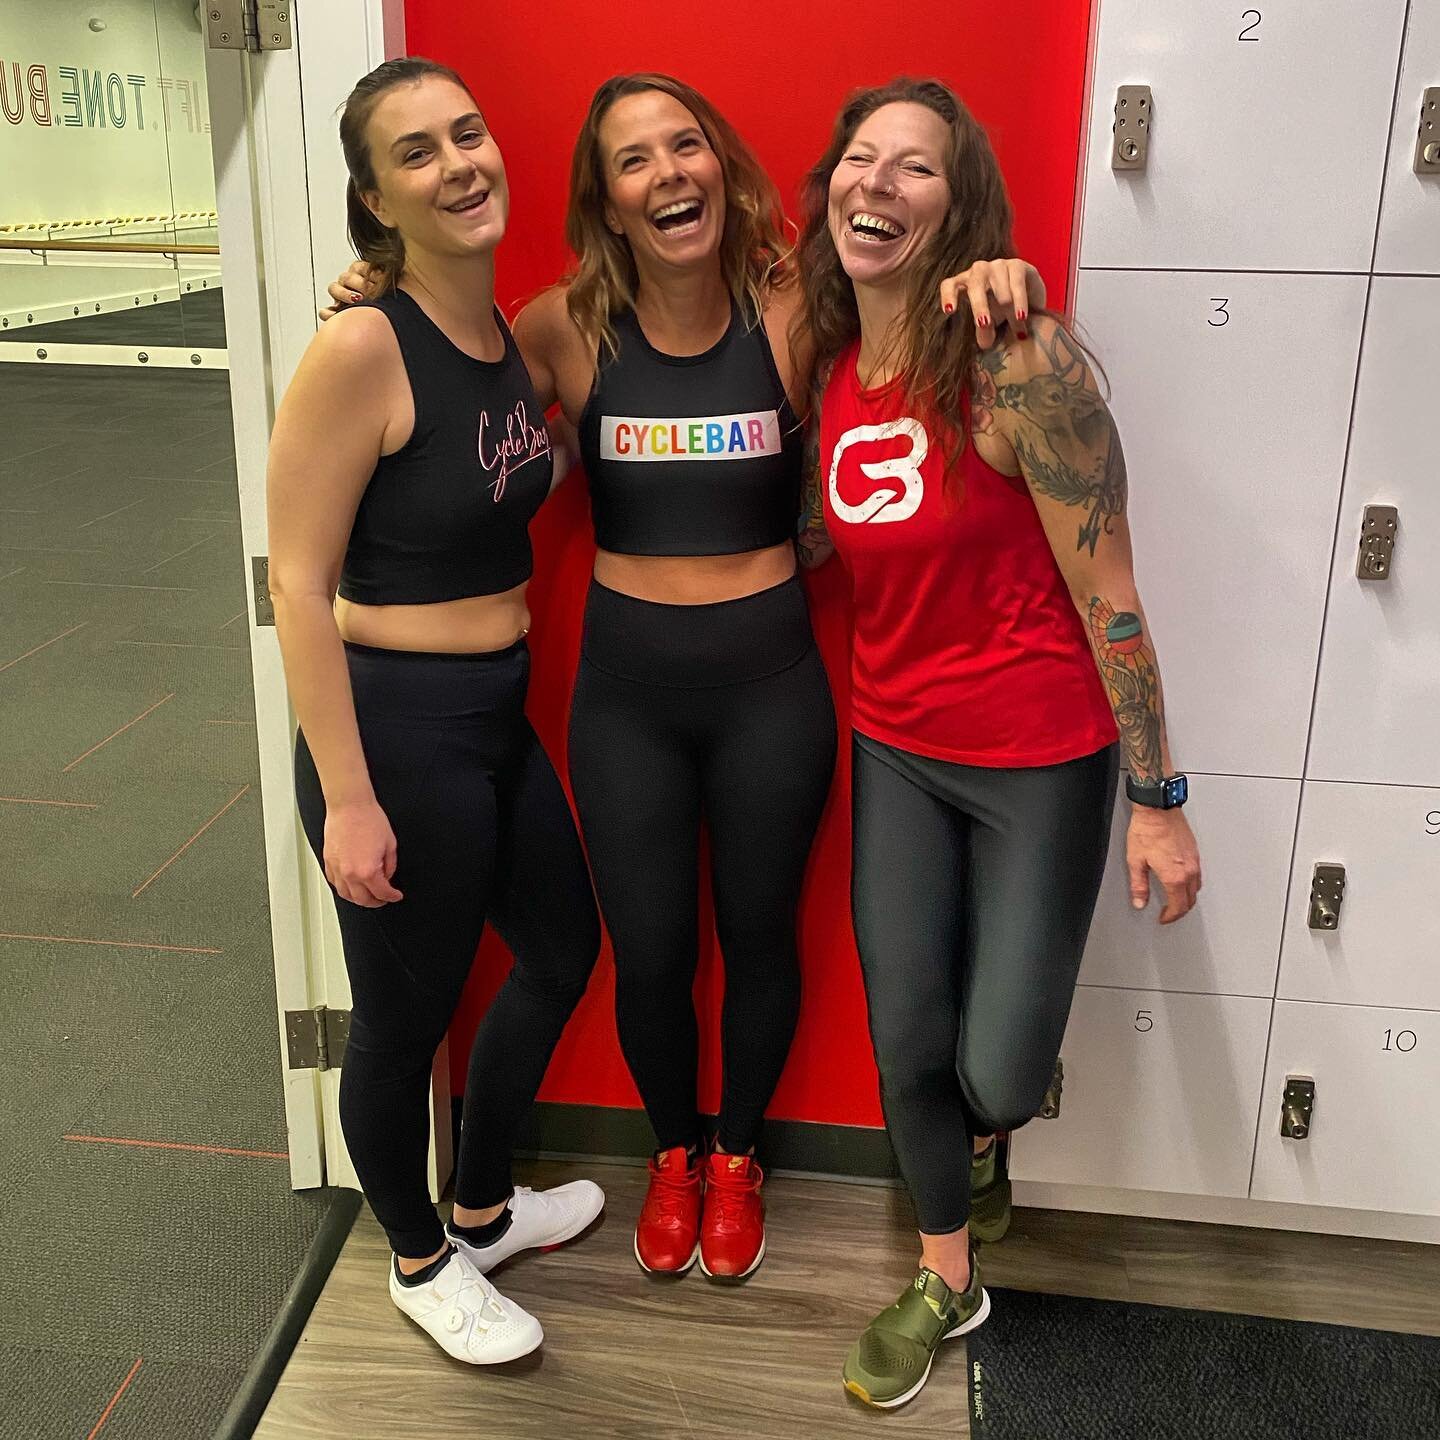 Come and have some spicy FUN riding with me tomorrow for Cinco de Mayo @cyclebar_aspen ! 9am performance ride and a noon FREE COMMUNITY XPRESS RIDE! I&rsquo;ve got some great familiar tunes in my playlists. Let&rsquo;s live La Vida Loca!